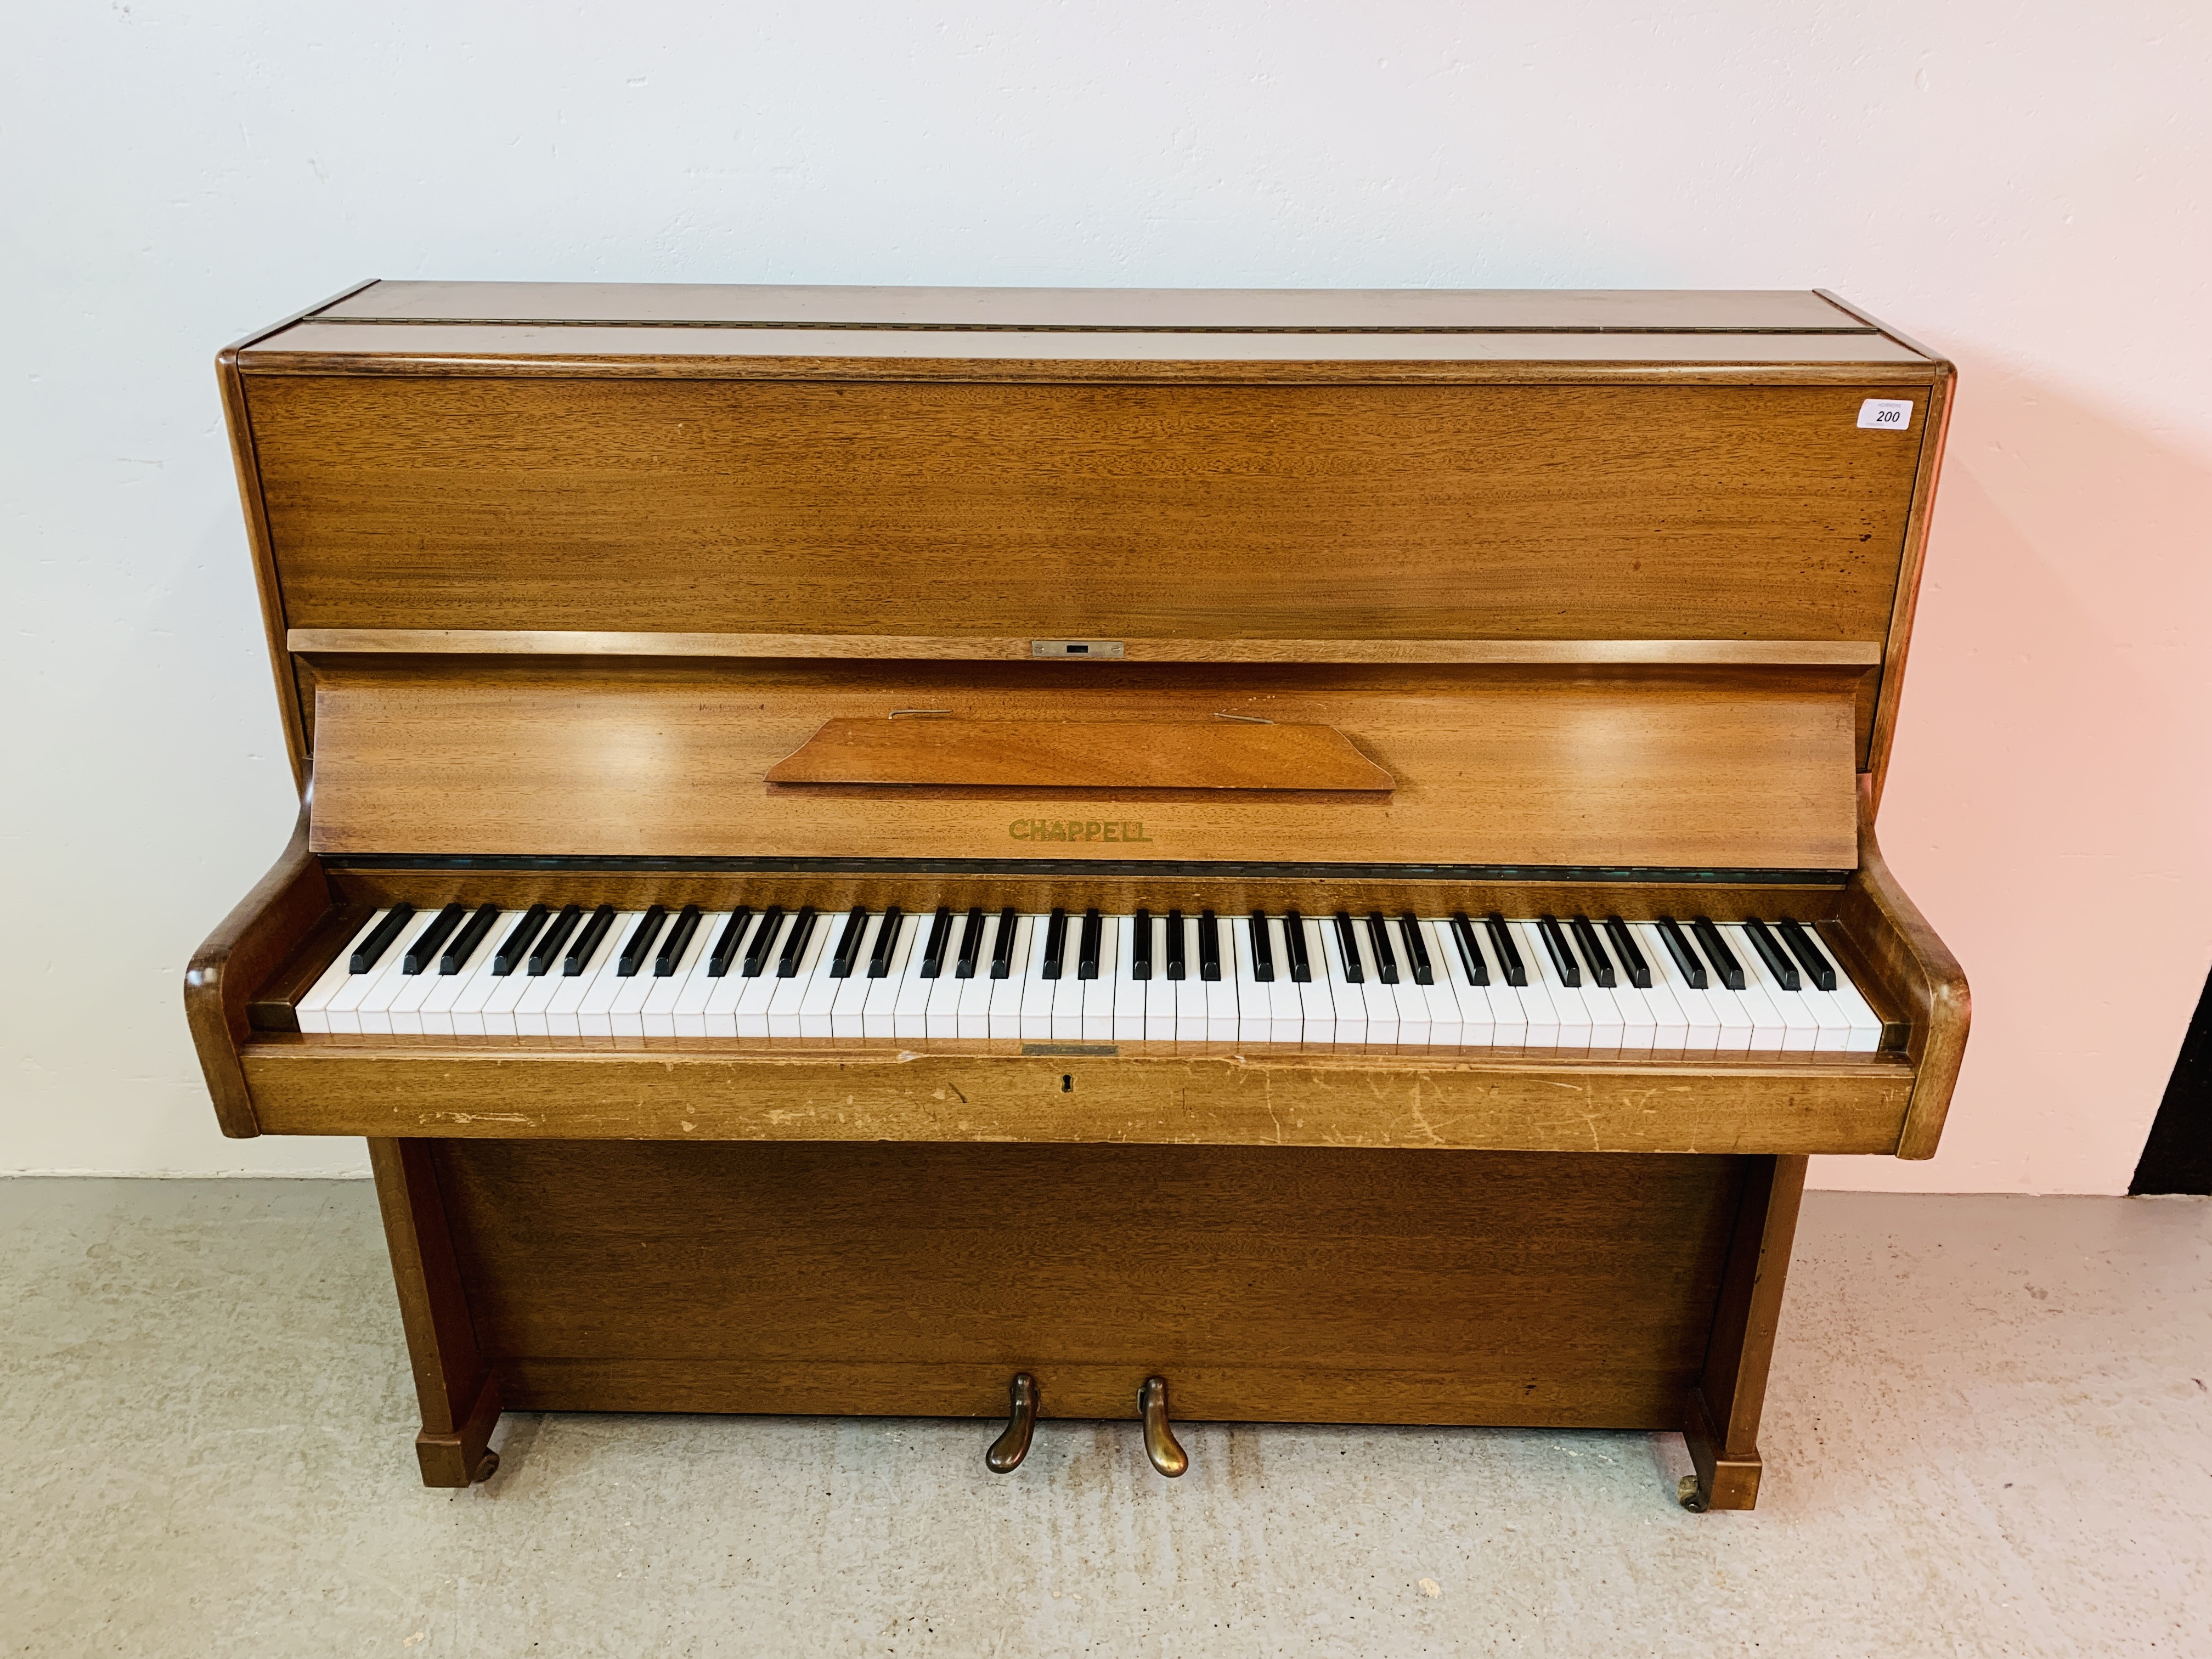 A CHAPPELL UPRIGHT OVERSTRUNG PIANO - Image 2 of 16